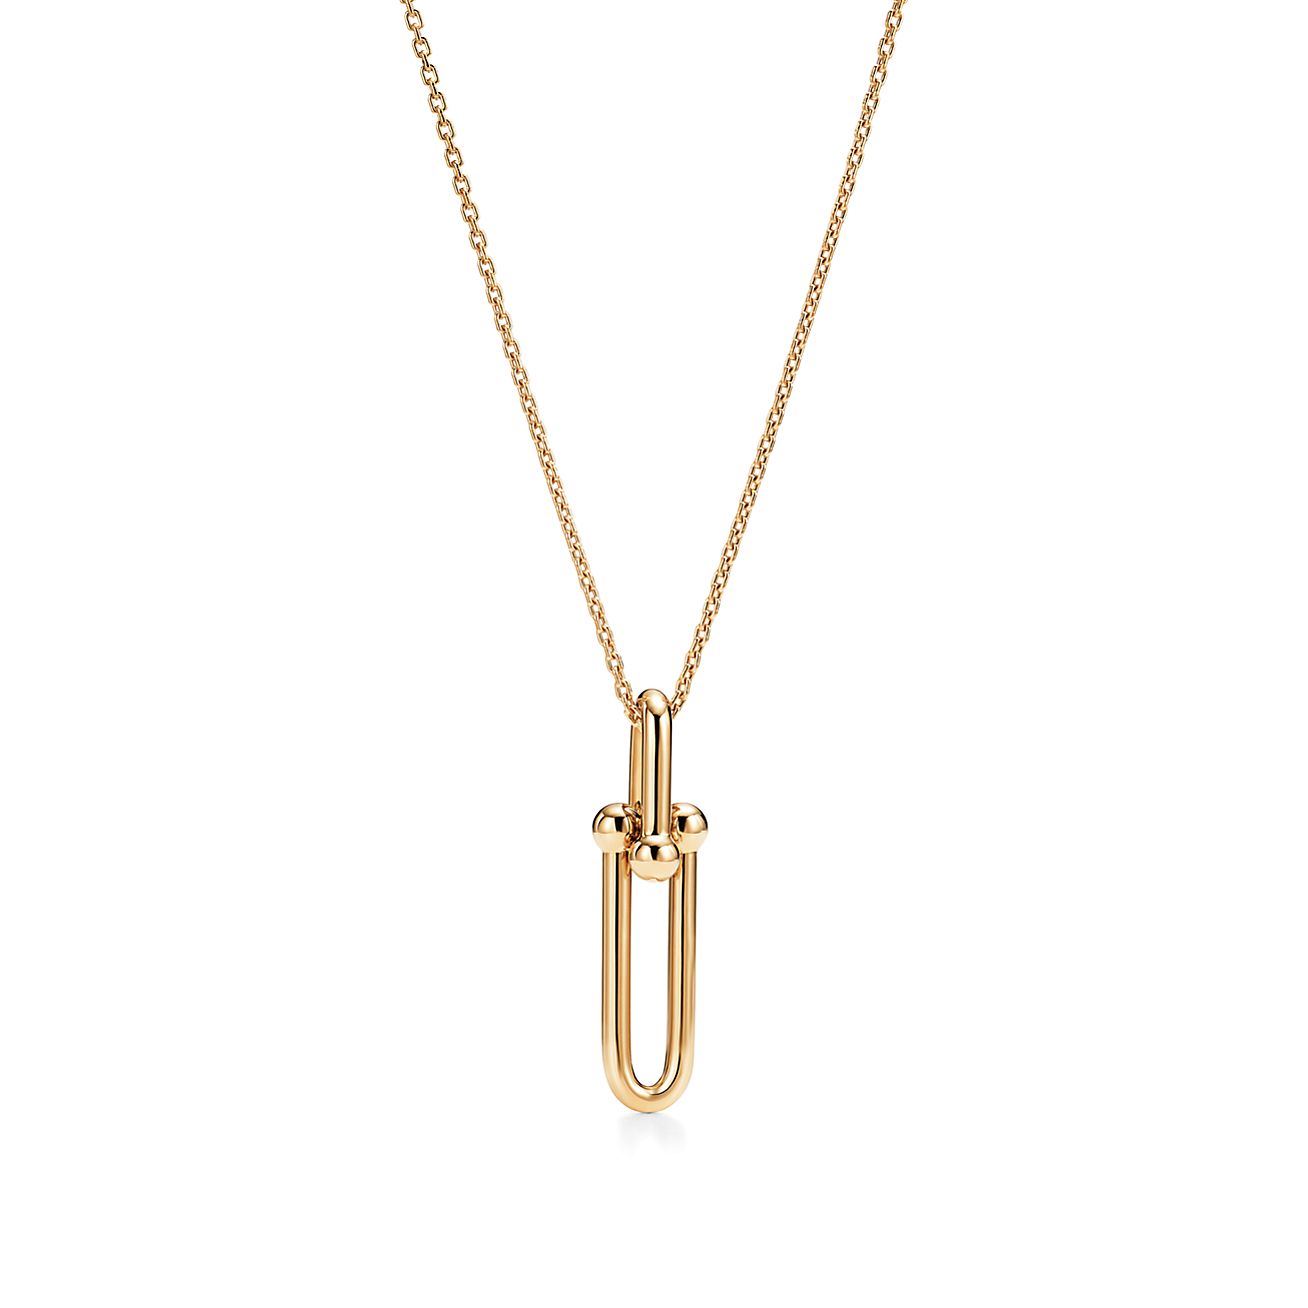 Tiffany HardWear Elongated Link Necklace in Yellow Gold